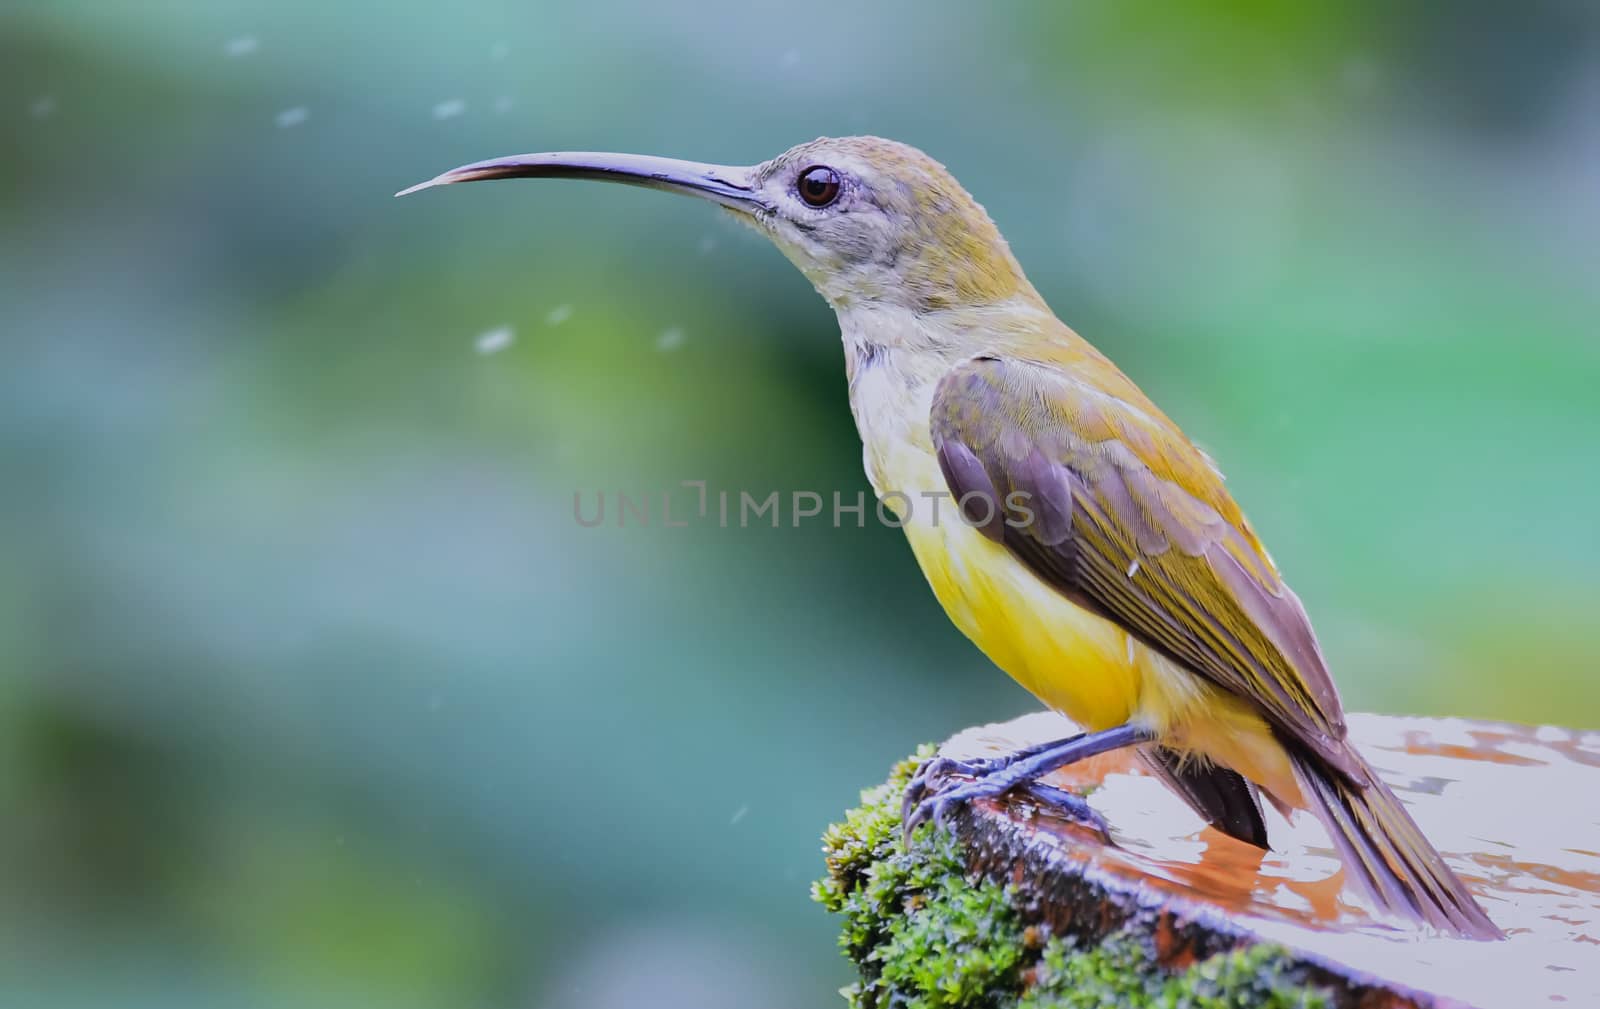 The little spiderhunter is a species of long-billed nectar-feeding bird in the family Nectariniidae found in the moist forests of South and Southeast Asia.